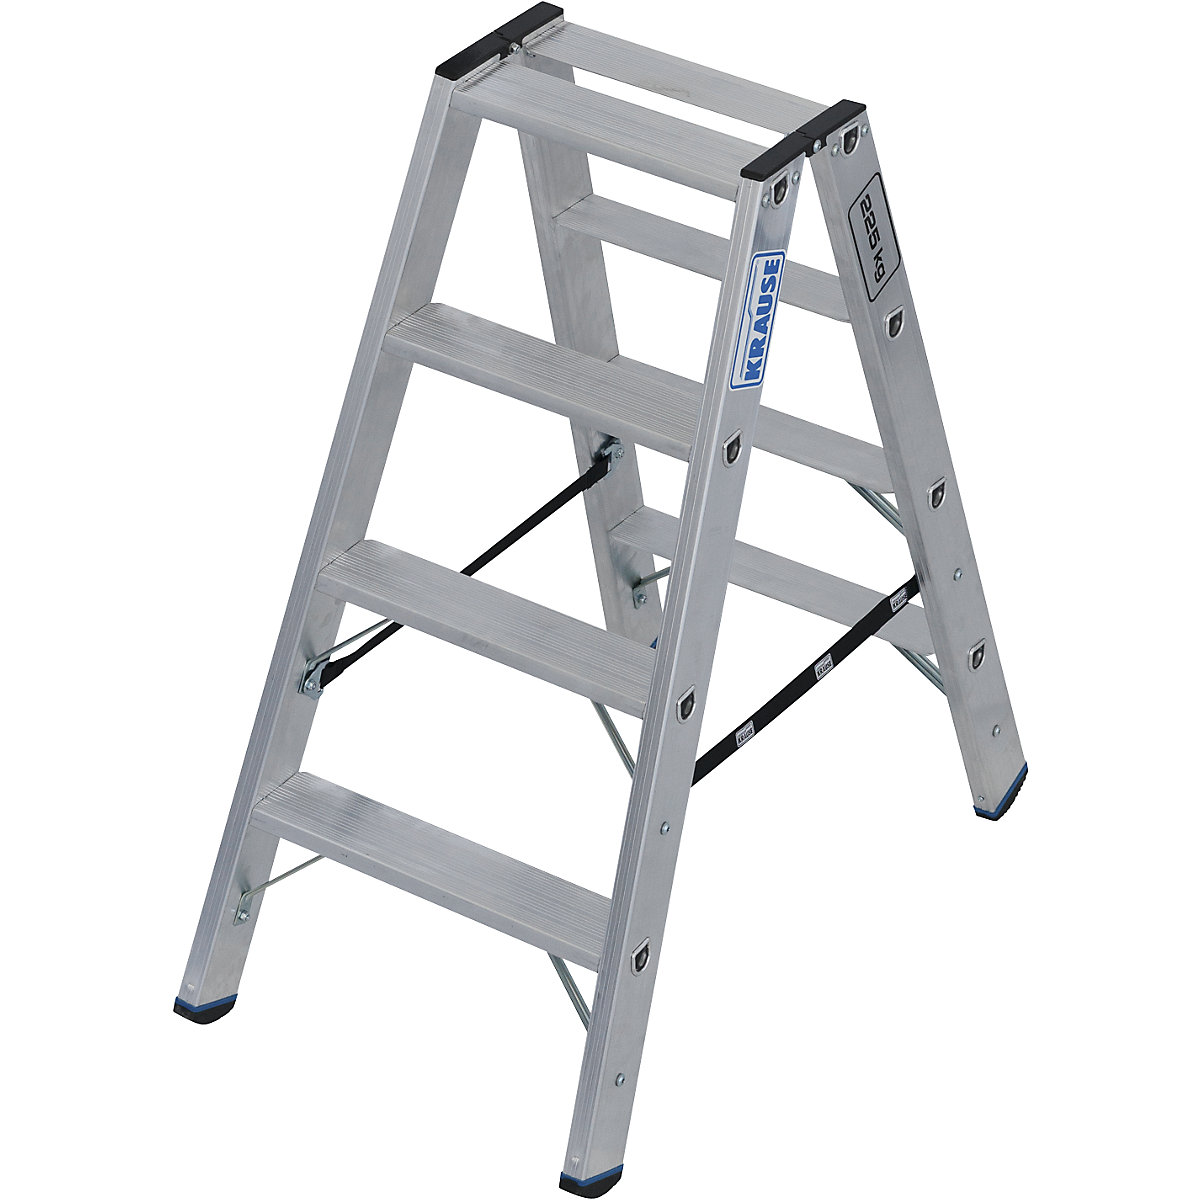 Heavy duty step ladder – KRAUSE, double sided access, up to 225 kg, 2x4 steps-2